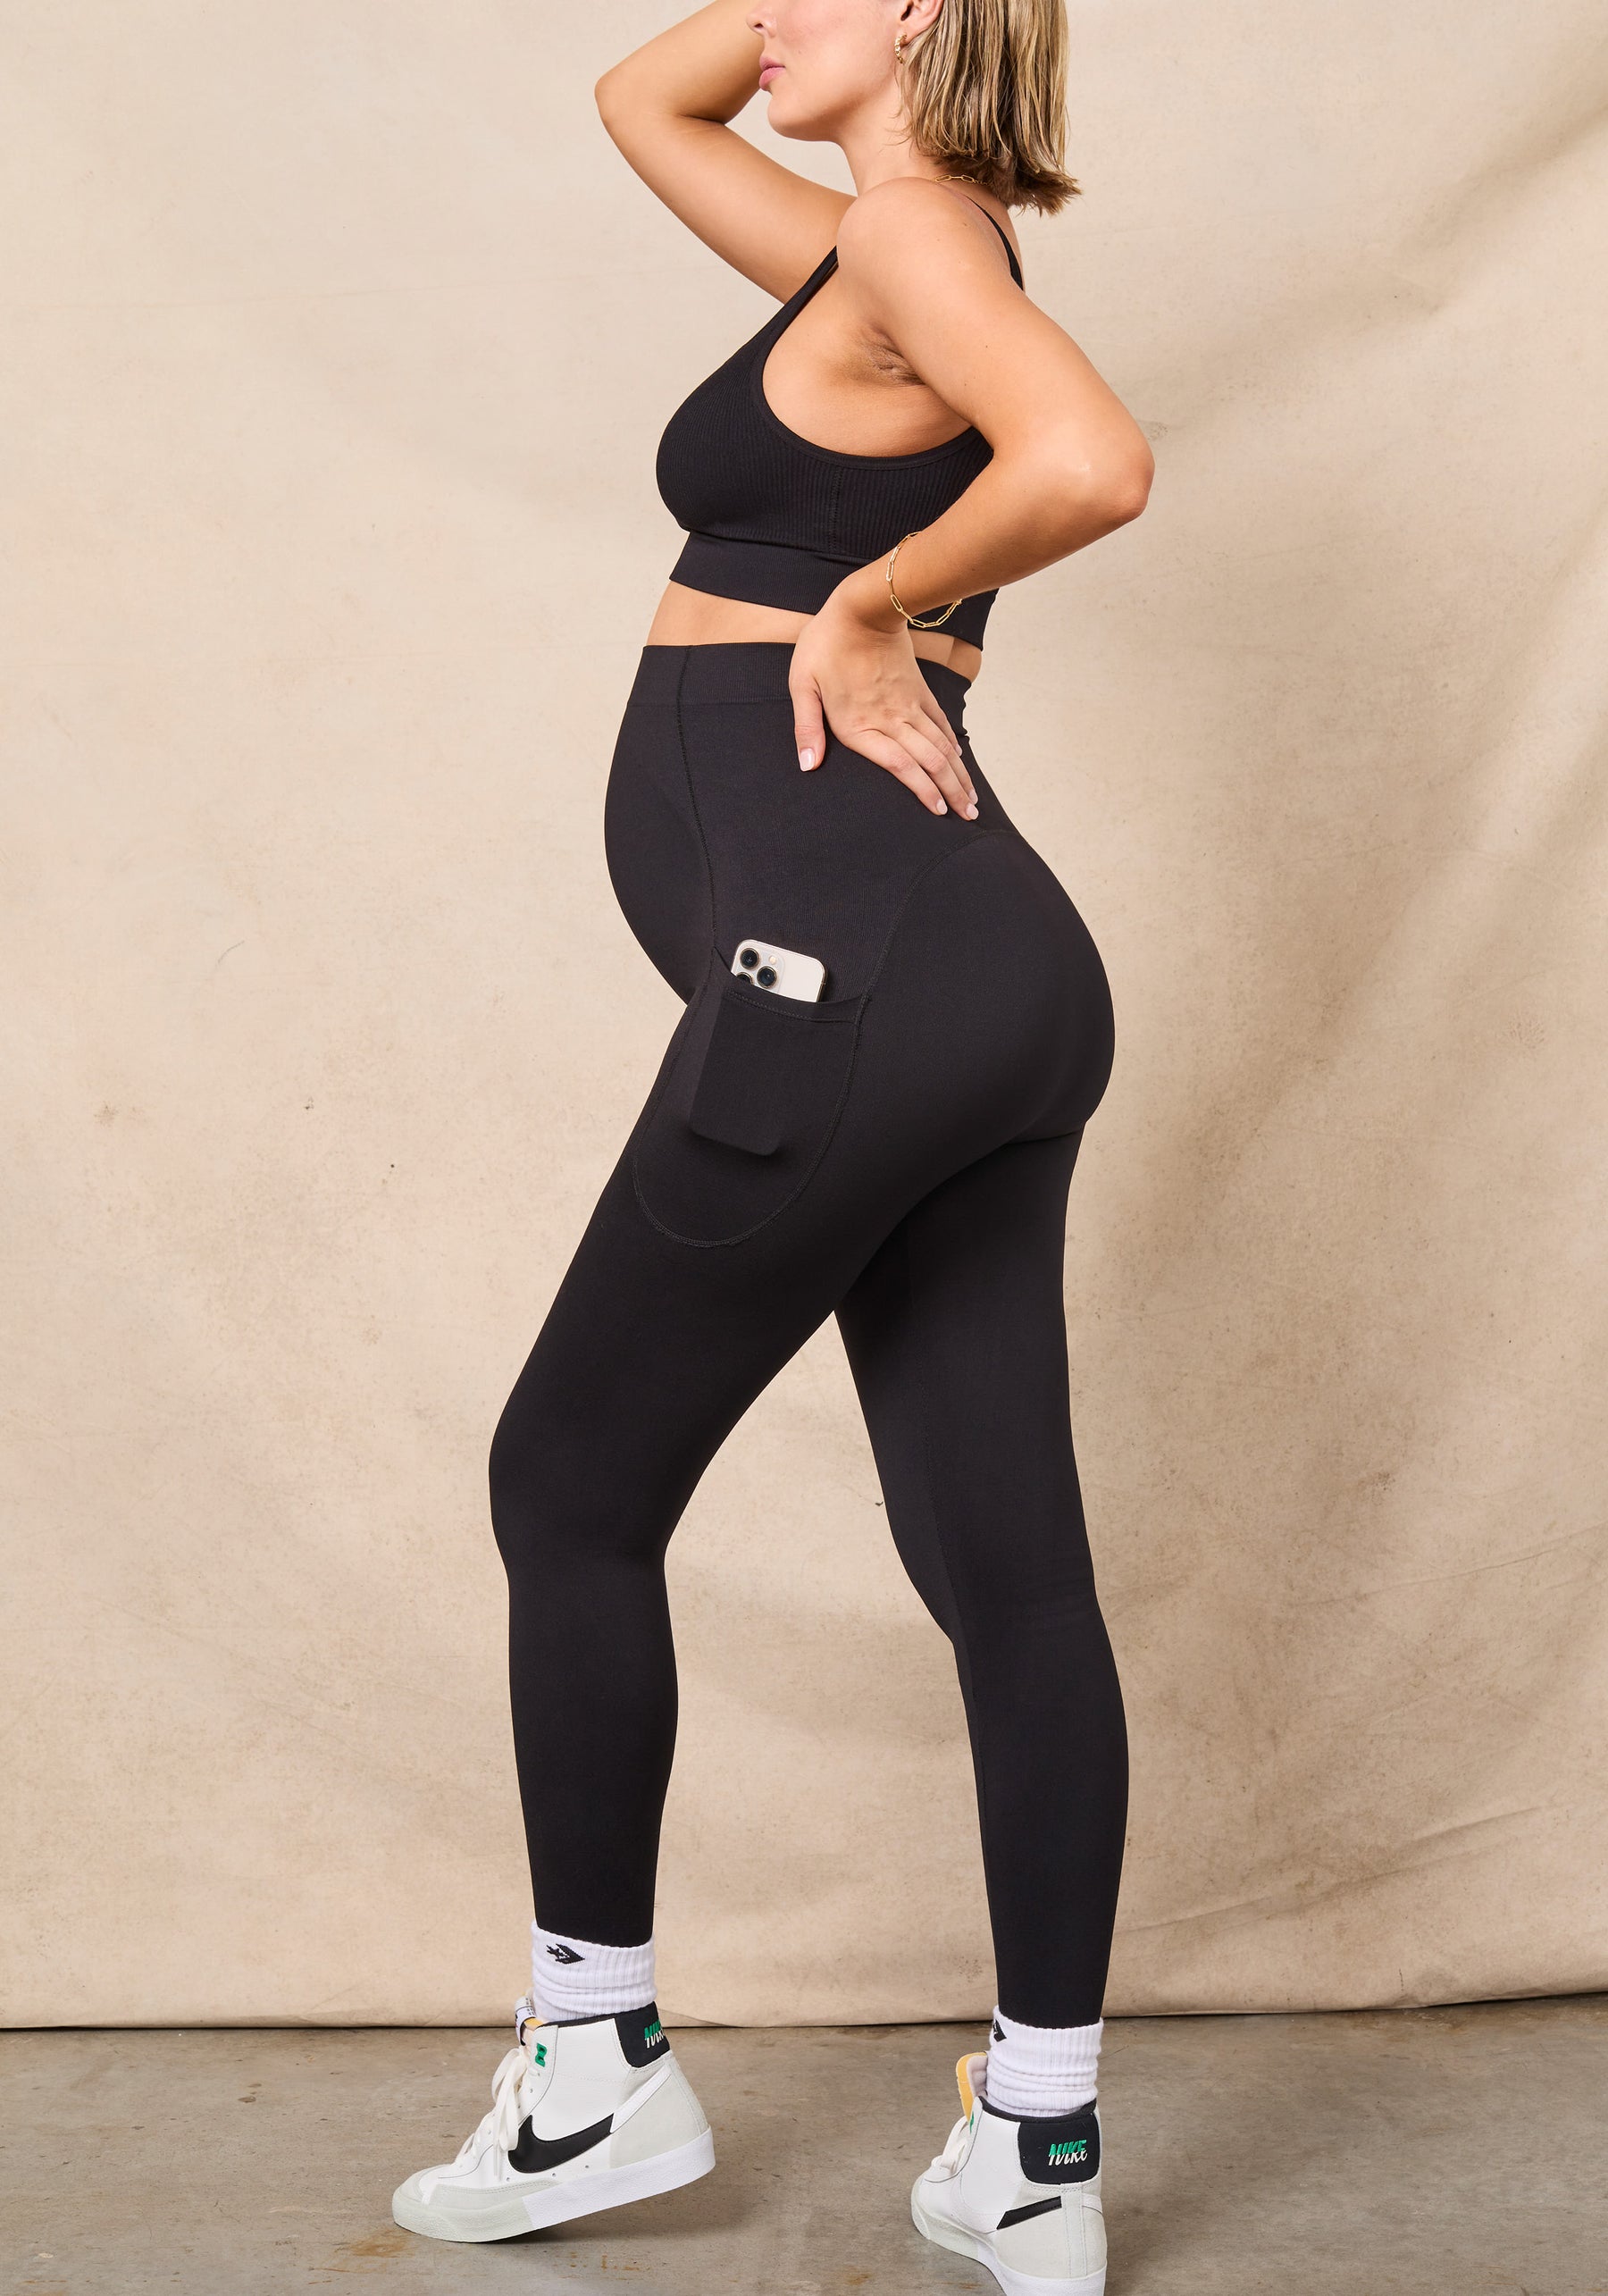 Blanqi Everyday Maternity Belly Support Leggings Black Size undefined - $48  - From Hannah